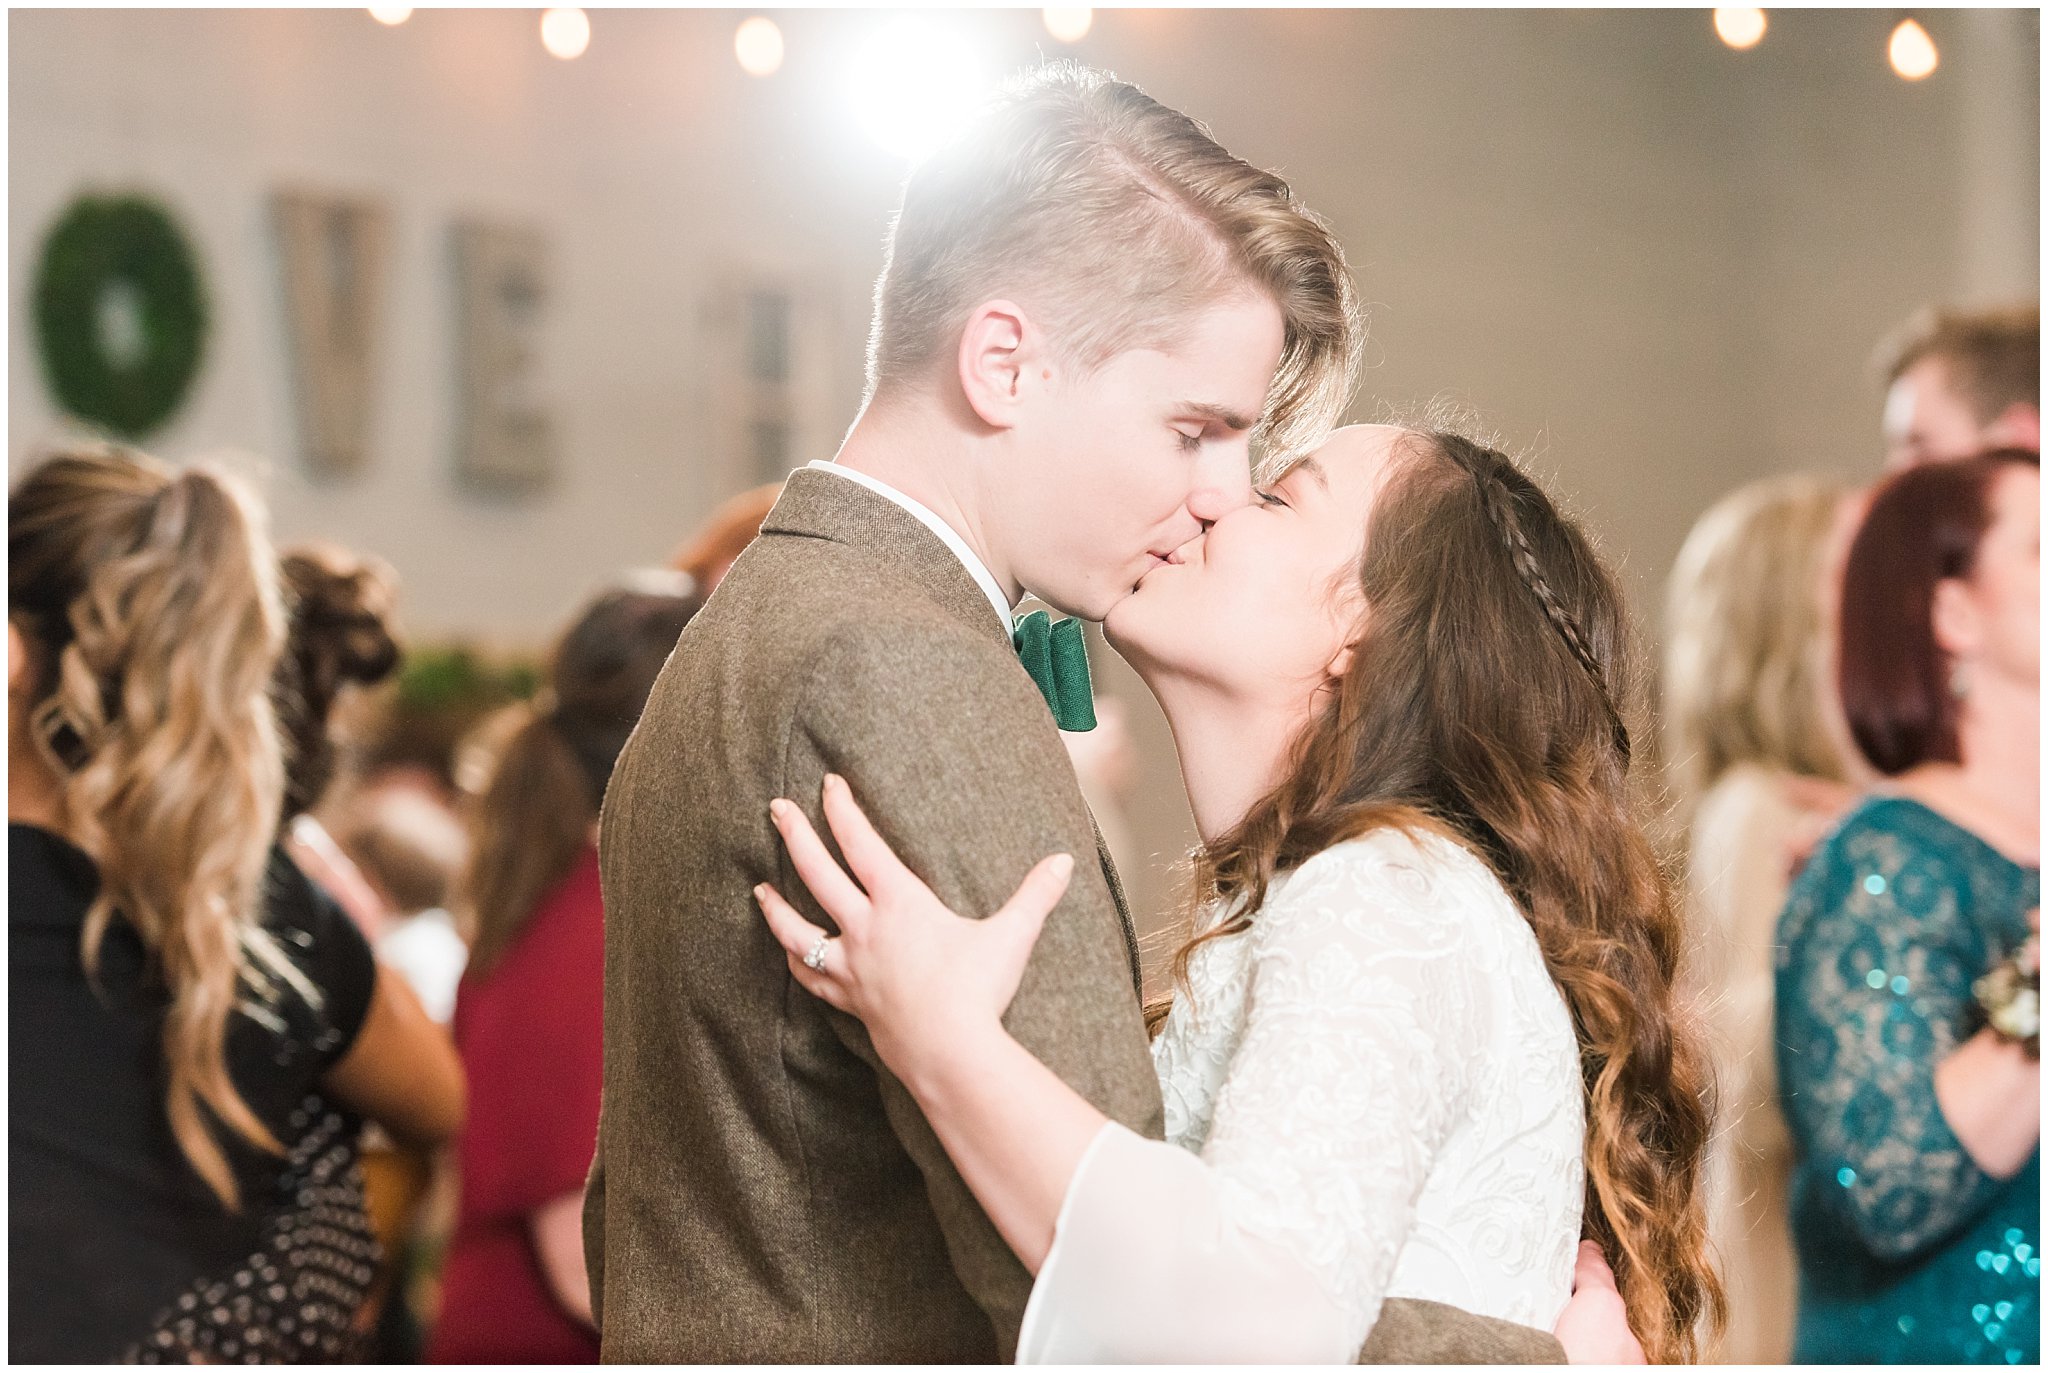 Bride and groom first dance during reception at Sweet Magnolia Venues | Brown, Emerald Green, and white wedding | Ogden Temple and Sweet Magnolia Wedding | Jessie and Dallin Photography